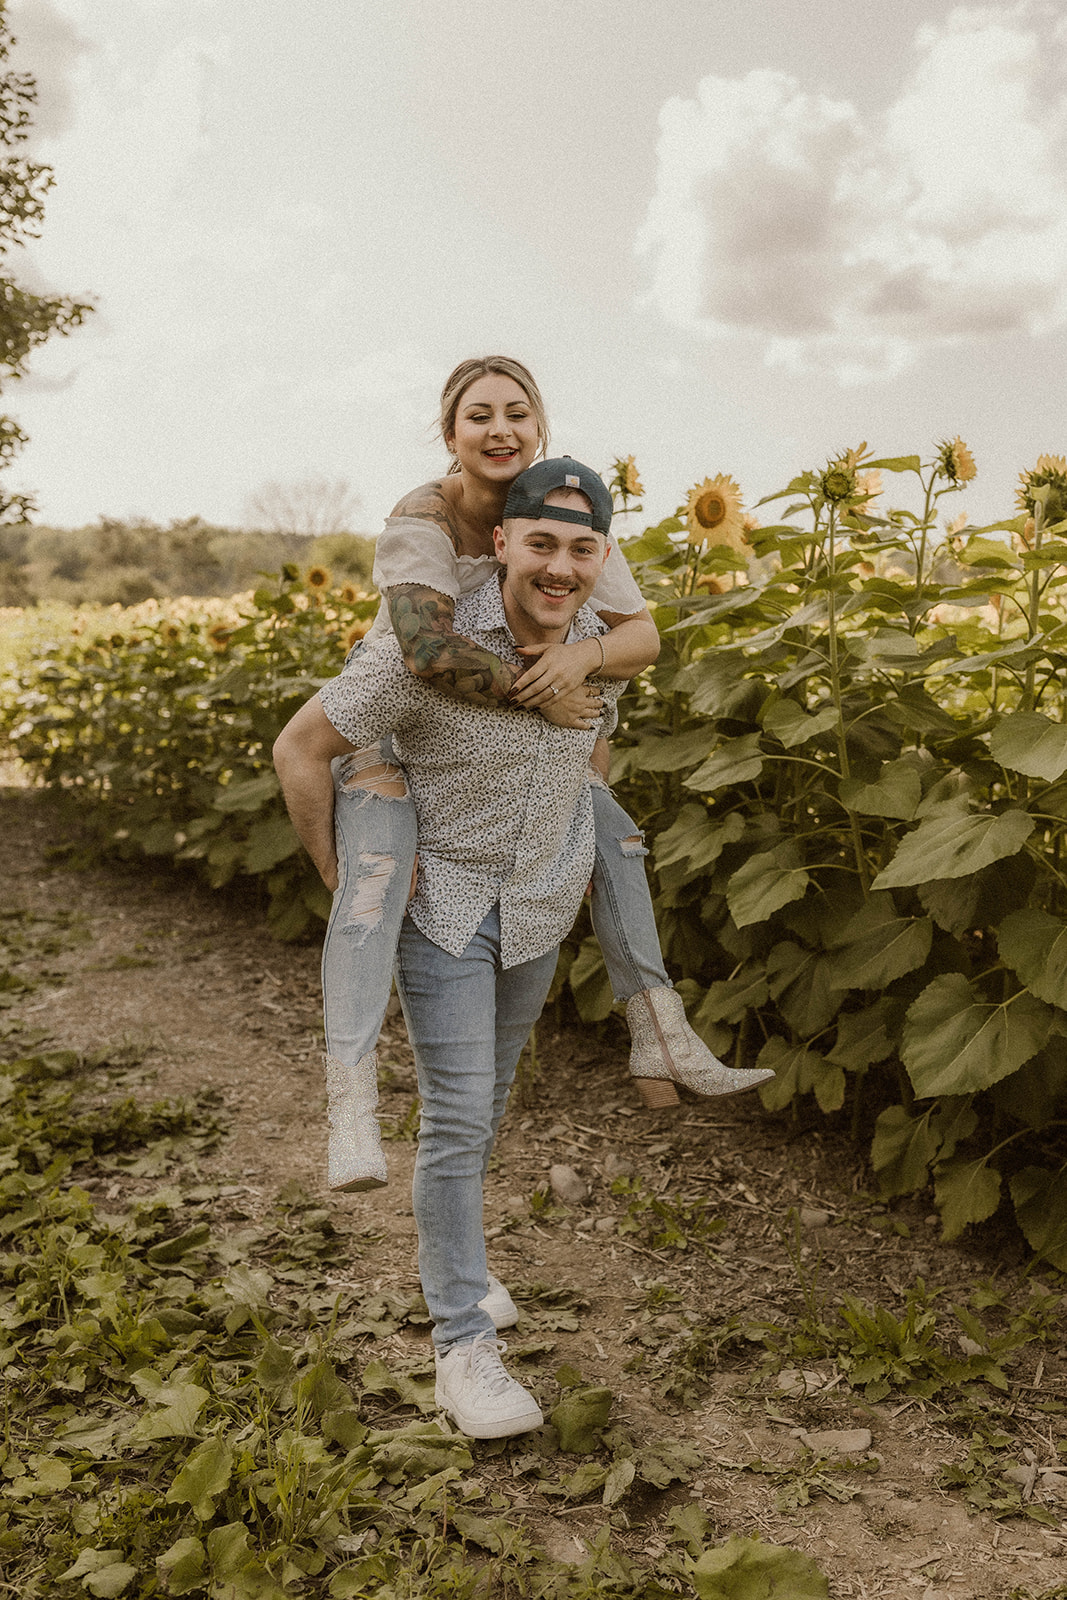 Fun and playful engagement photos in a sunflower field filled with adventurous moments